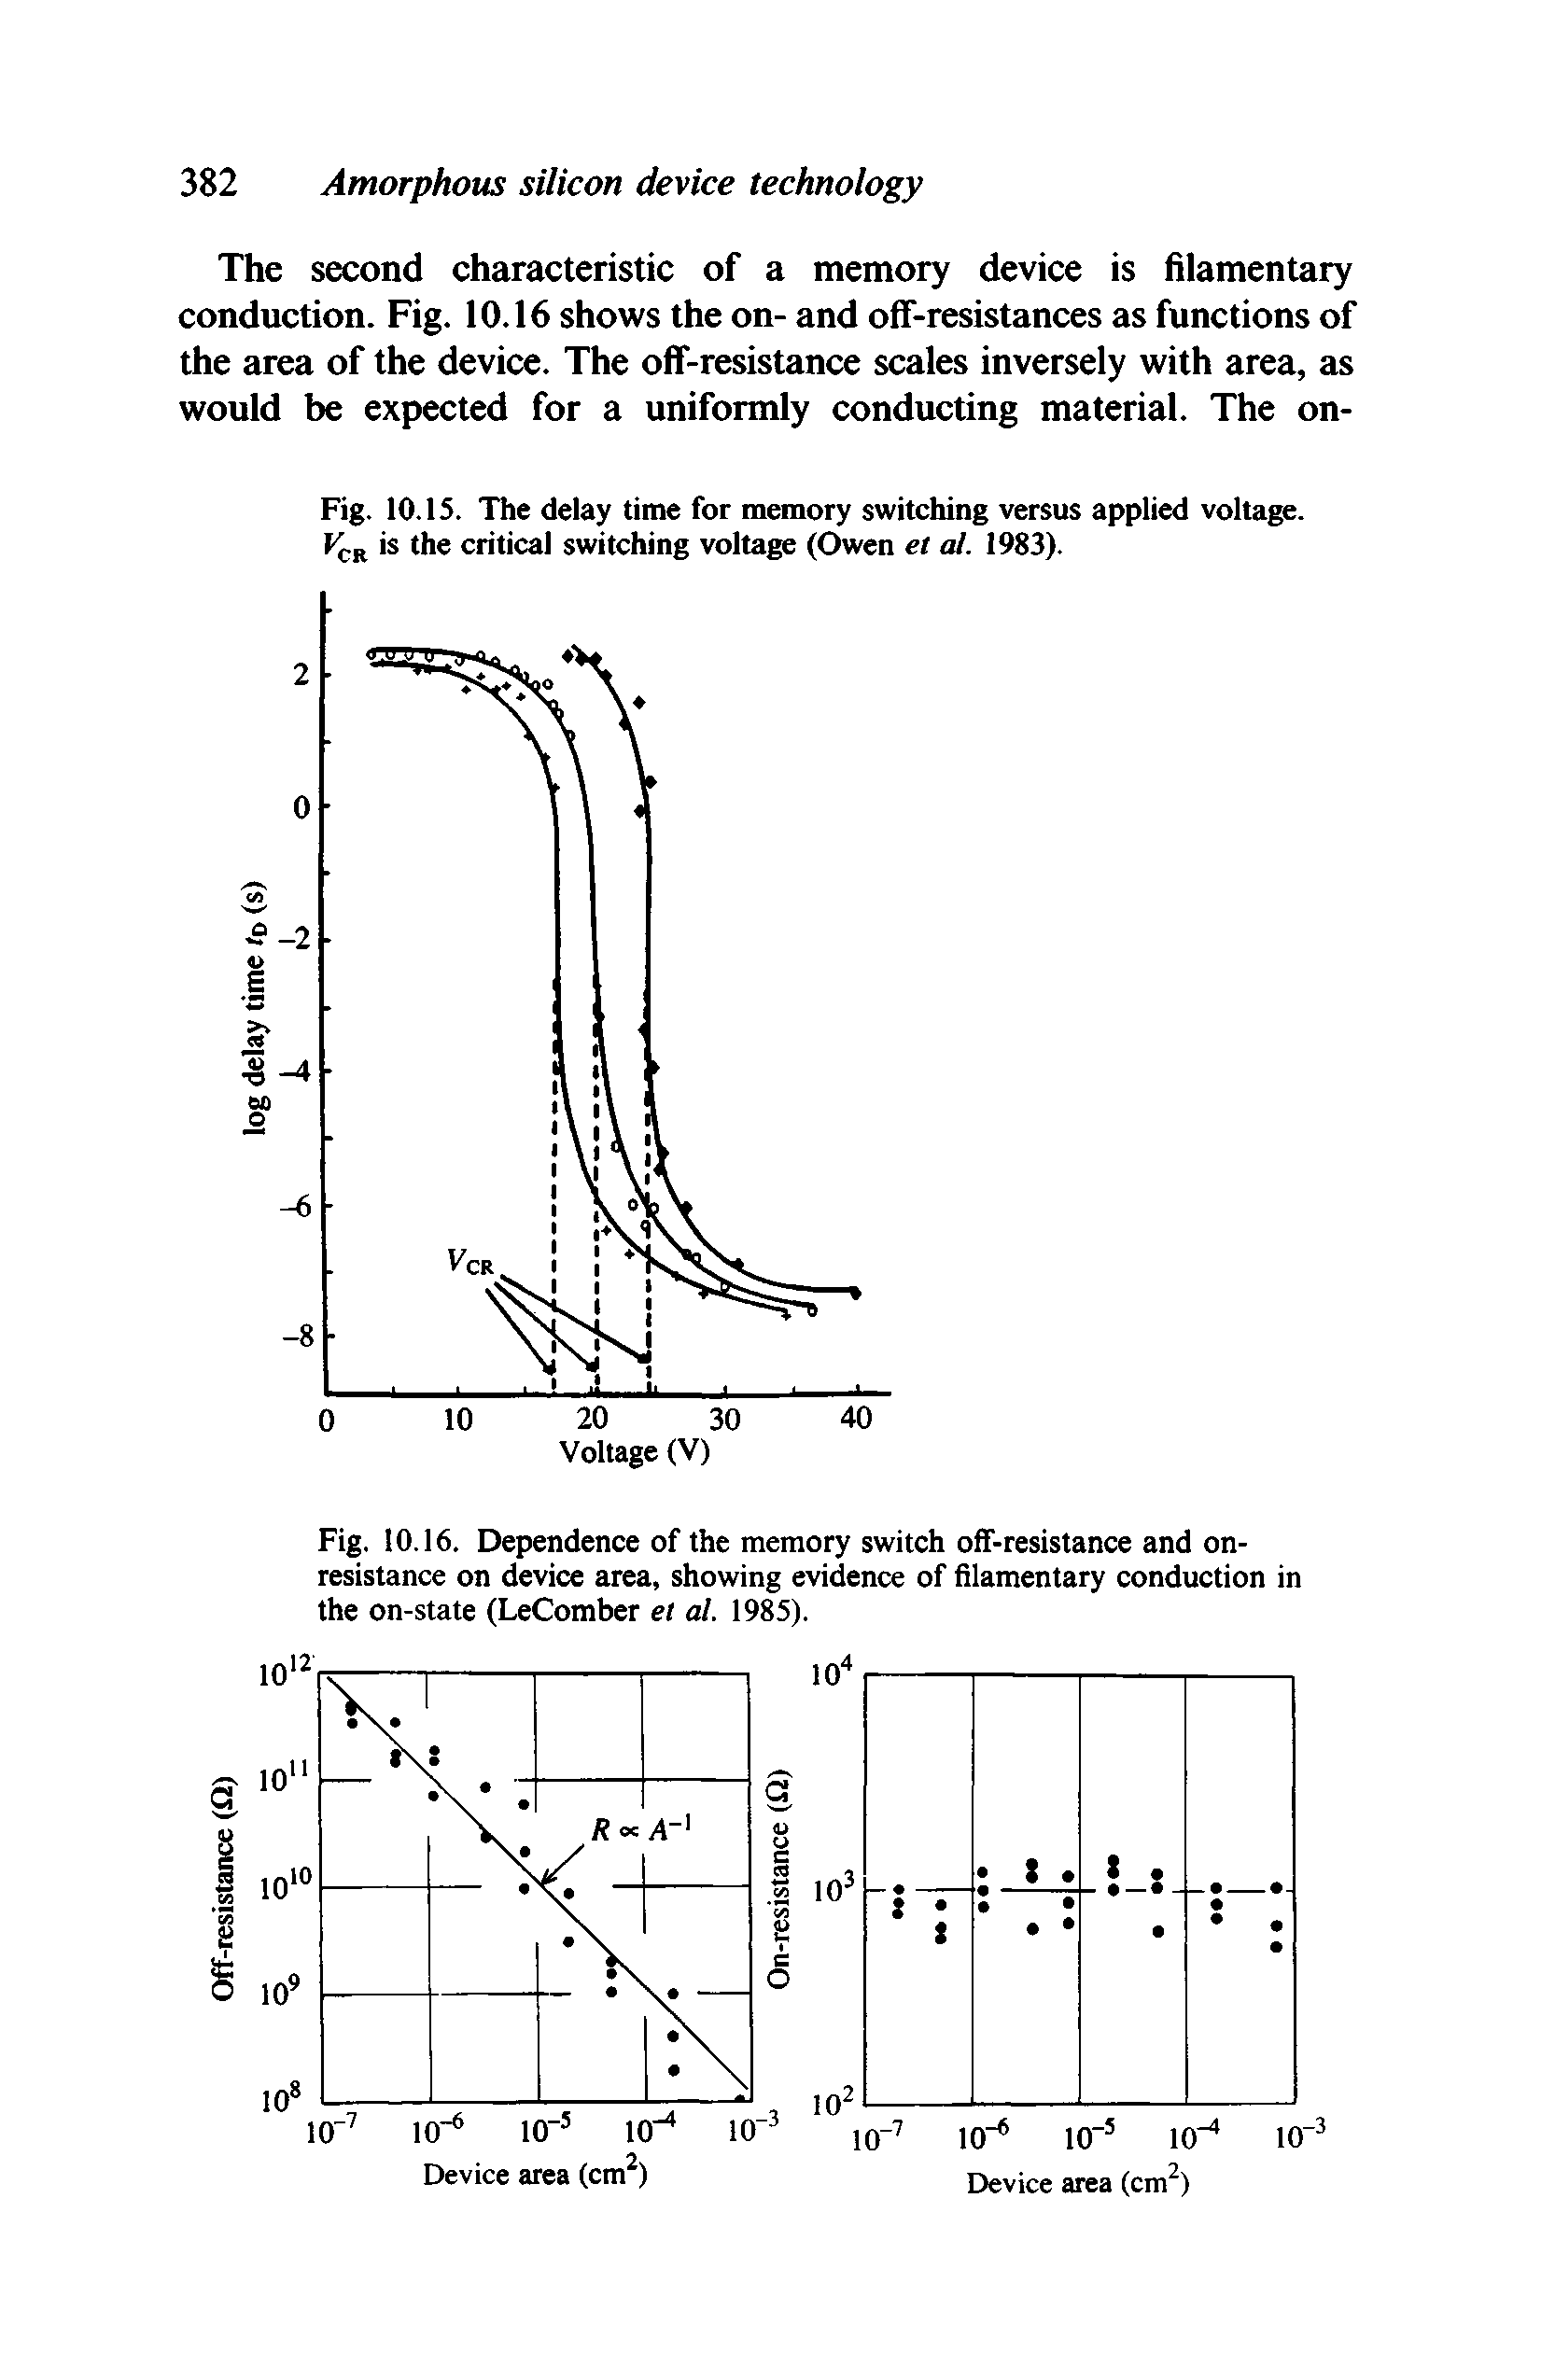 Fig. 10.IS. The delay time for memory switching versus applied voltage, is the critical switching voltage (Owen et at. 1983).